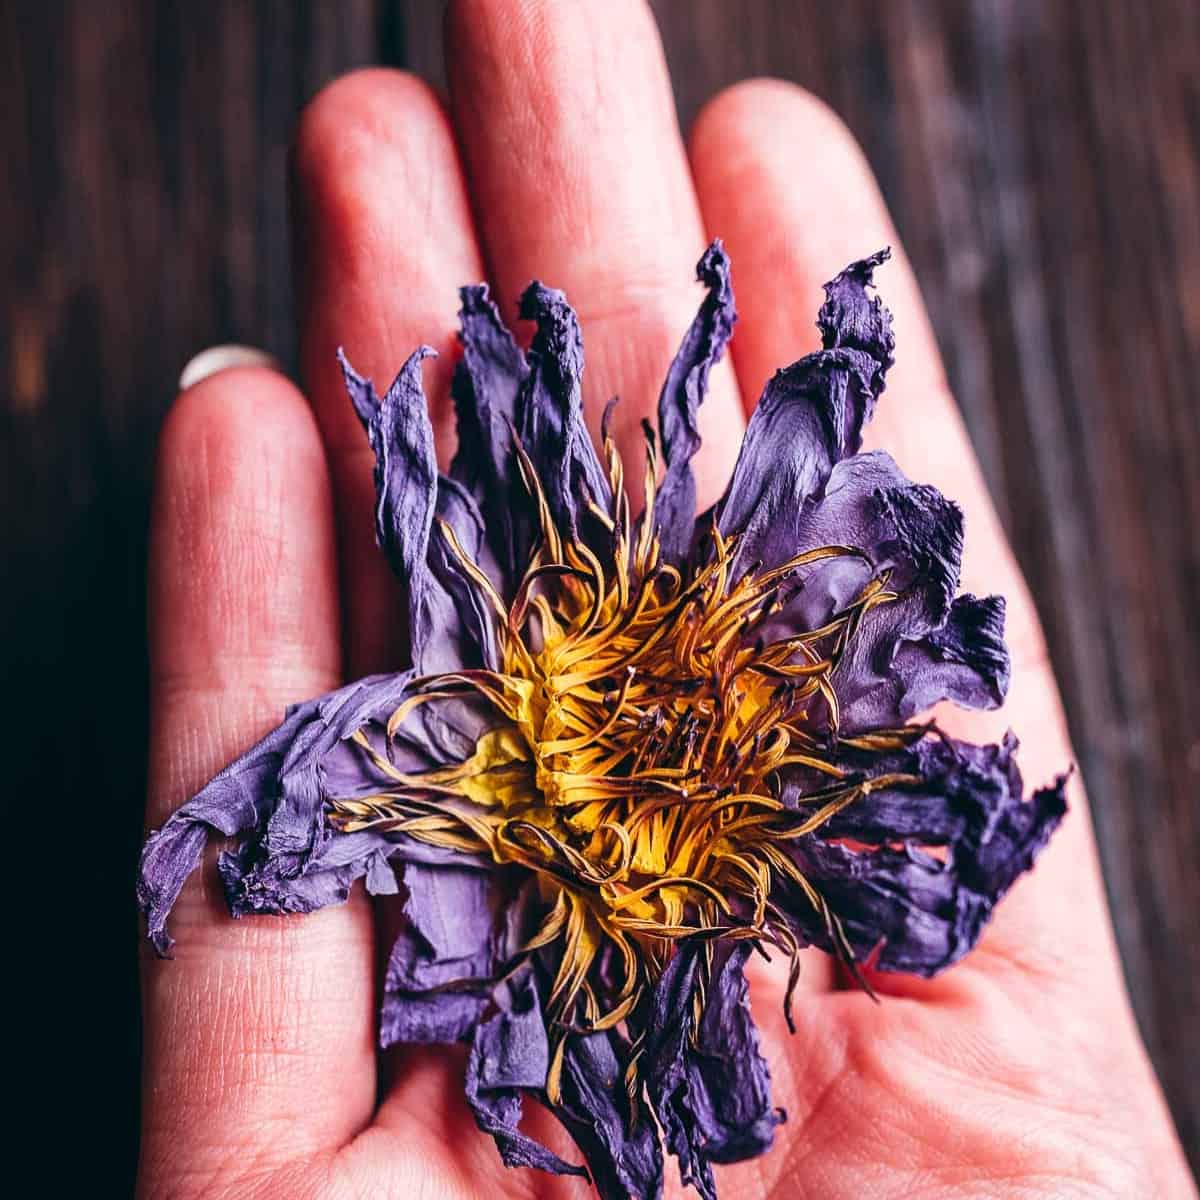 A hand holding a purple dried lotus flower.